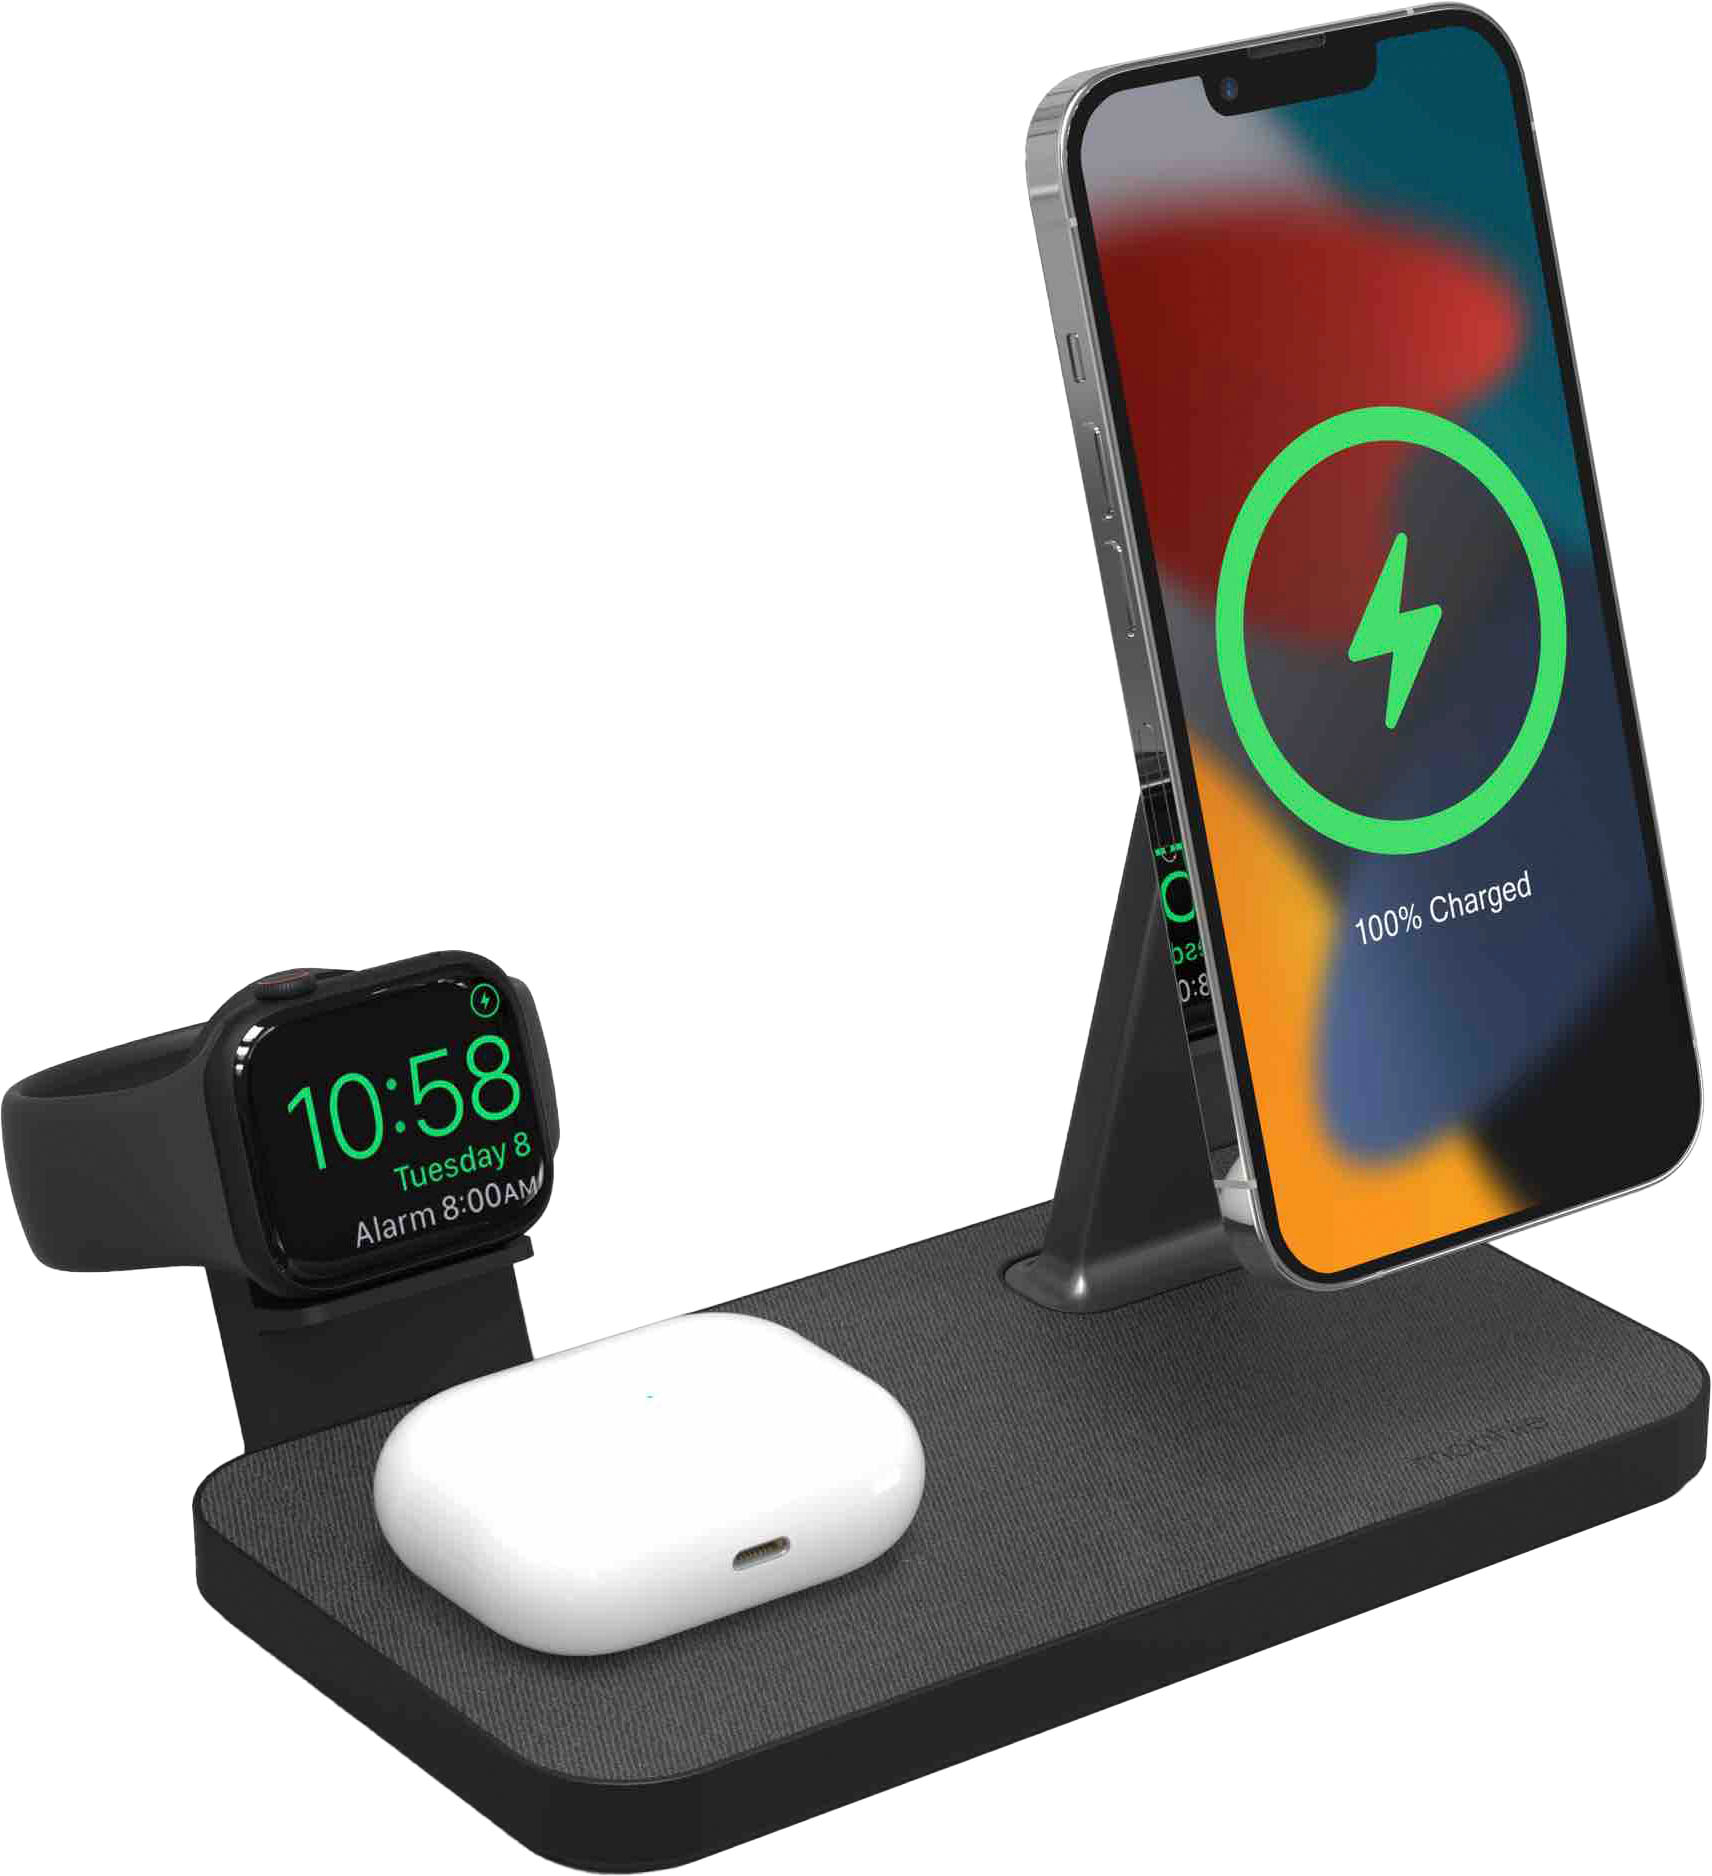 3-in-1 Wireless Charging Pad with Official MagSafe Charging 15W